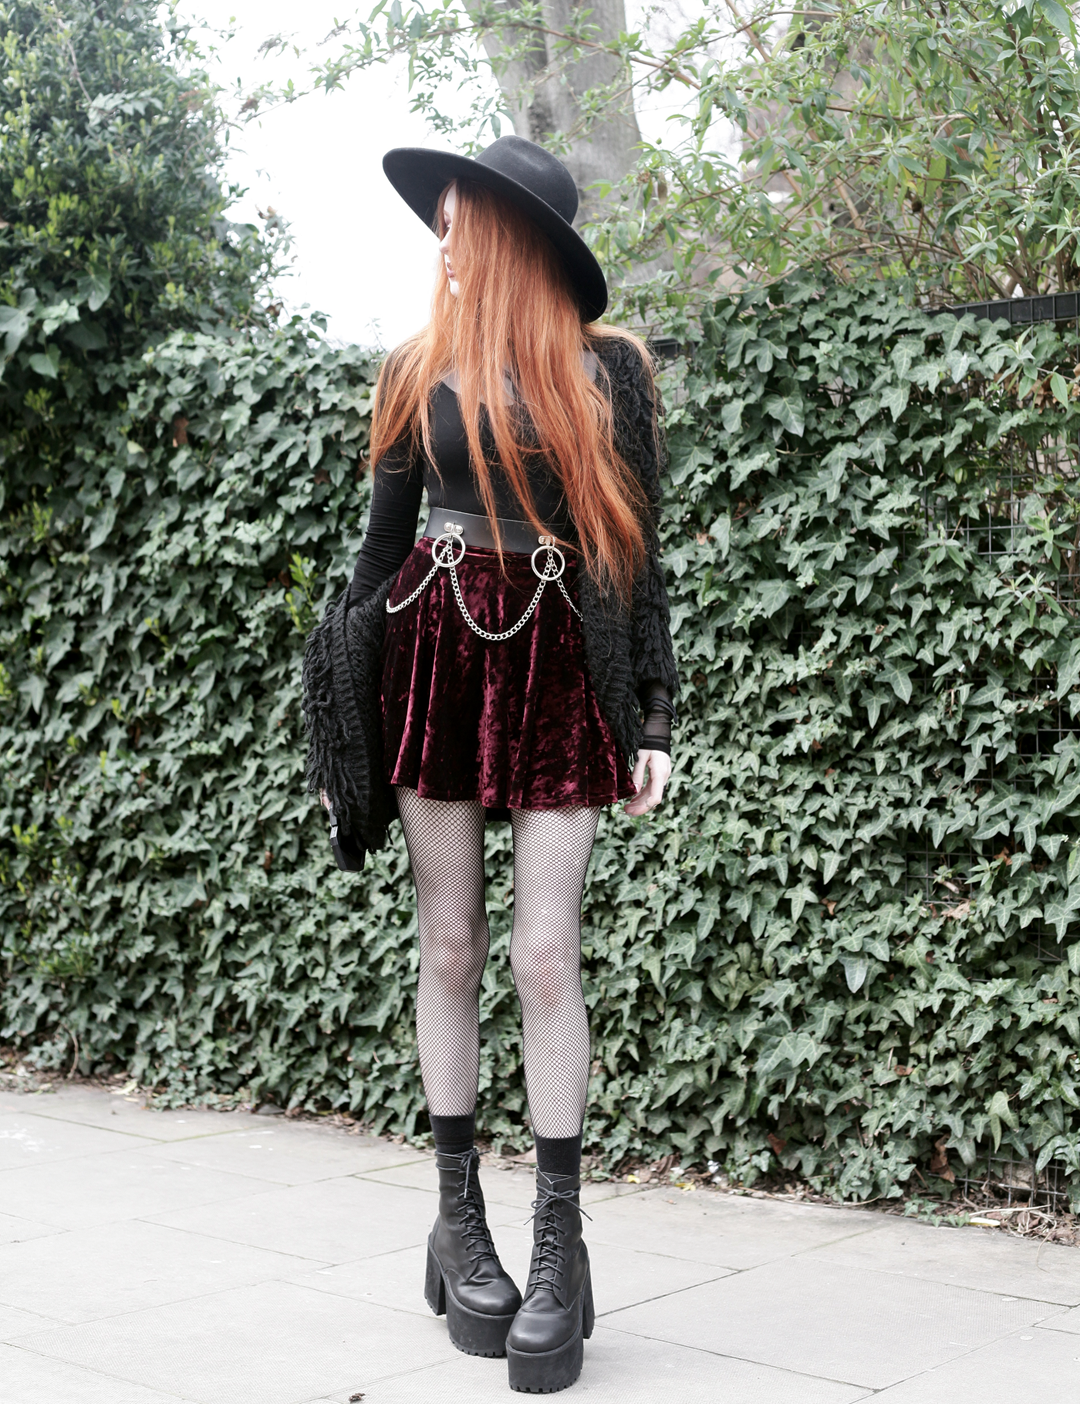 Olivia Emily wears Rogue and Wolf Moondoll Top, Killstar Fedora Hat, Crushed Velvet skirt, Mary Wyatt Chain Belt and Unif Scosche Boots